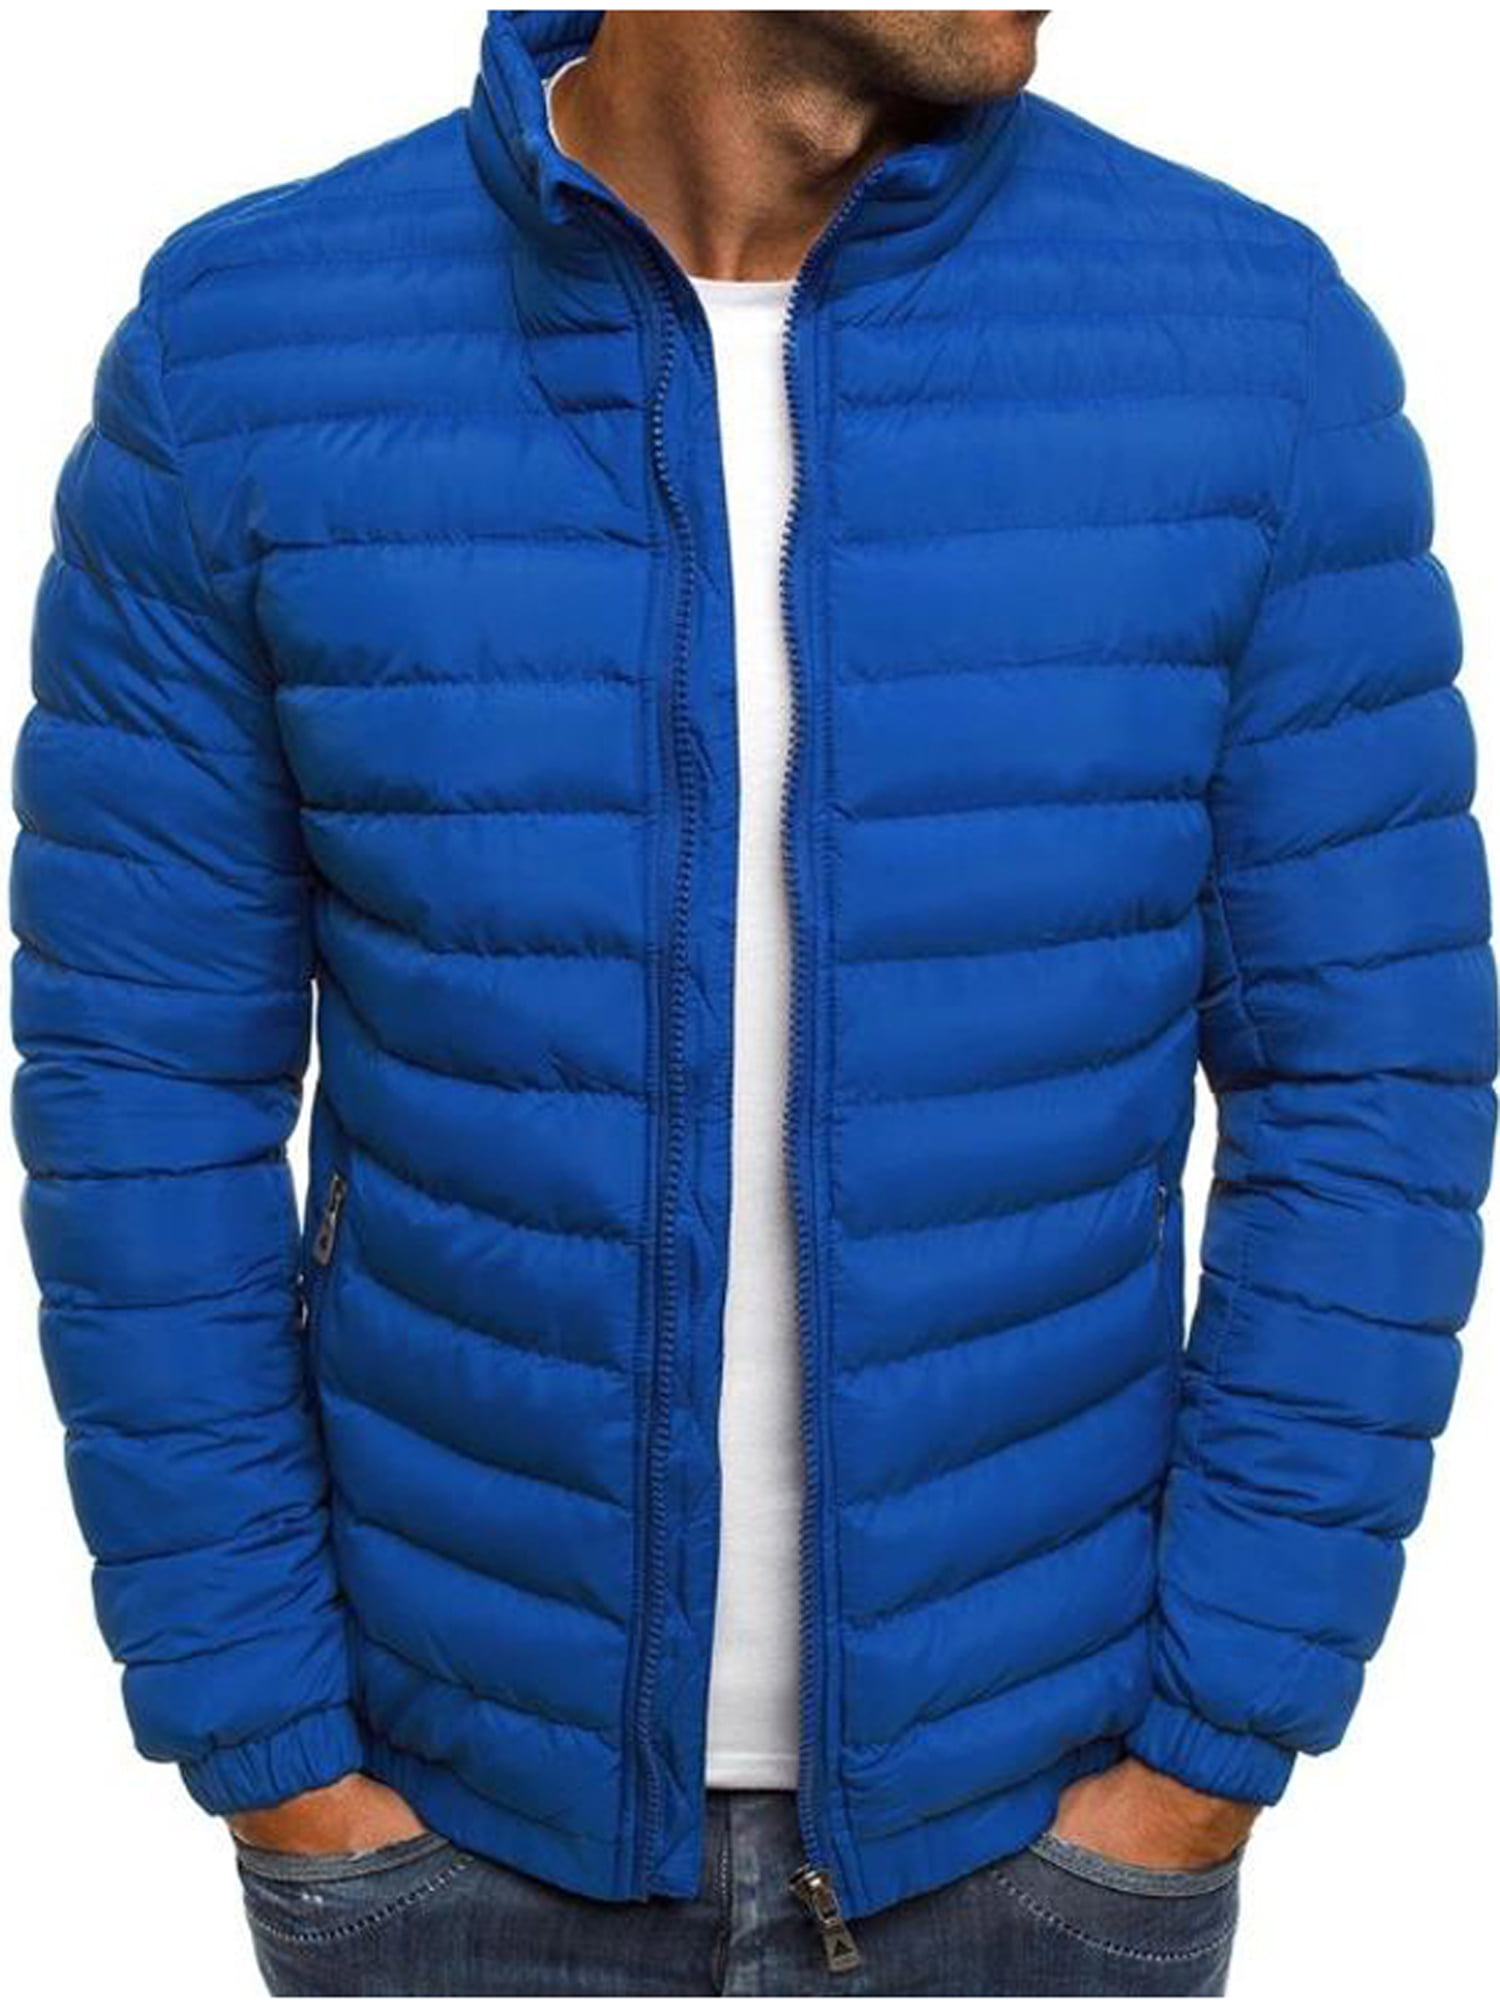 UltraClub mens Quilted Puffy Jacket 8469 